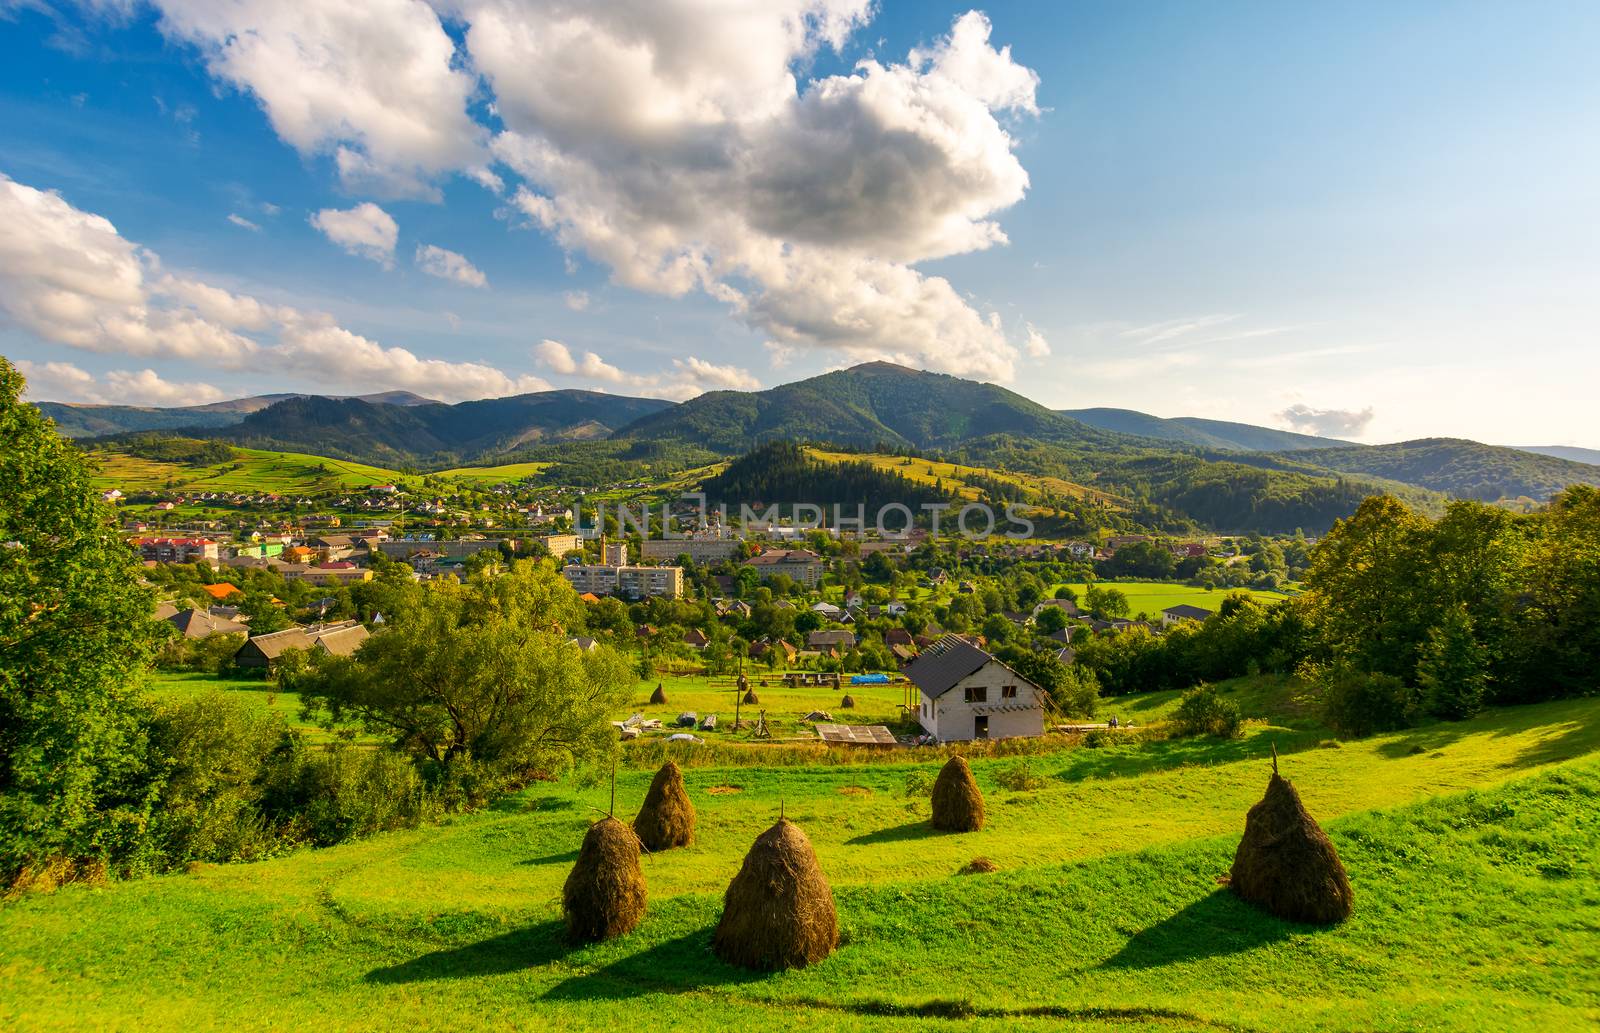 beautiful rural landscape in mountains. haystacks on the grassy hills. village at the foot of the mountain. interesting cloud formation over the ridge. lovely sunny afternoon